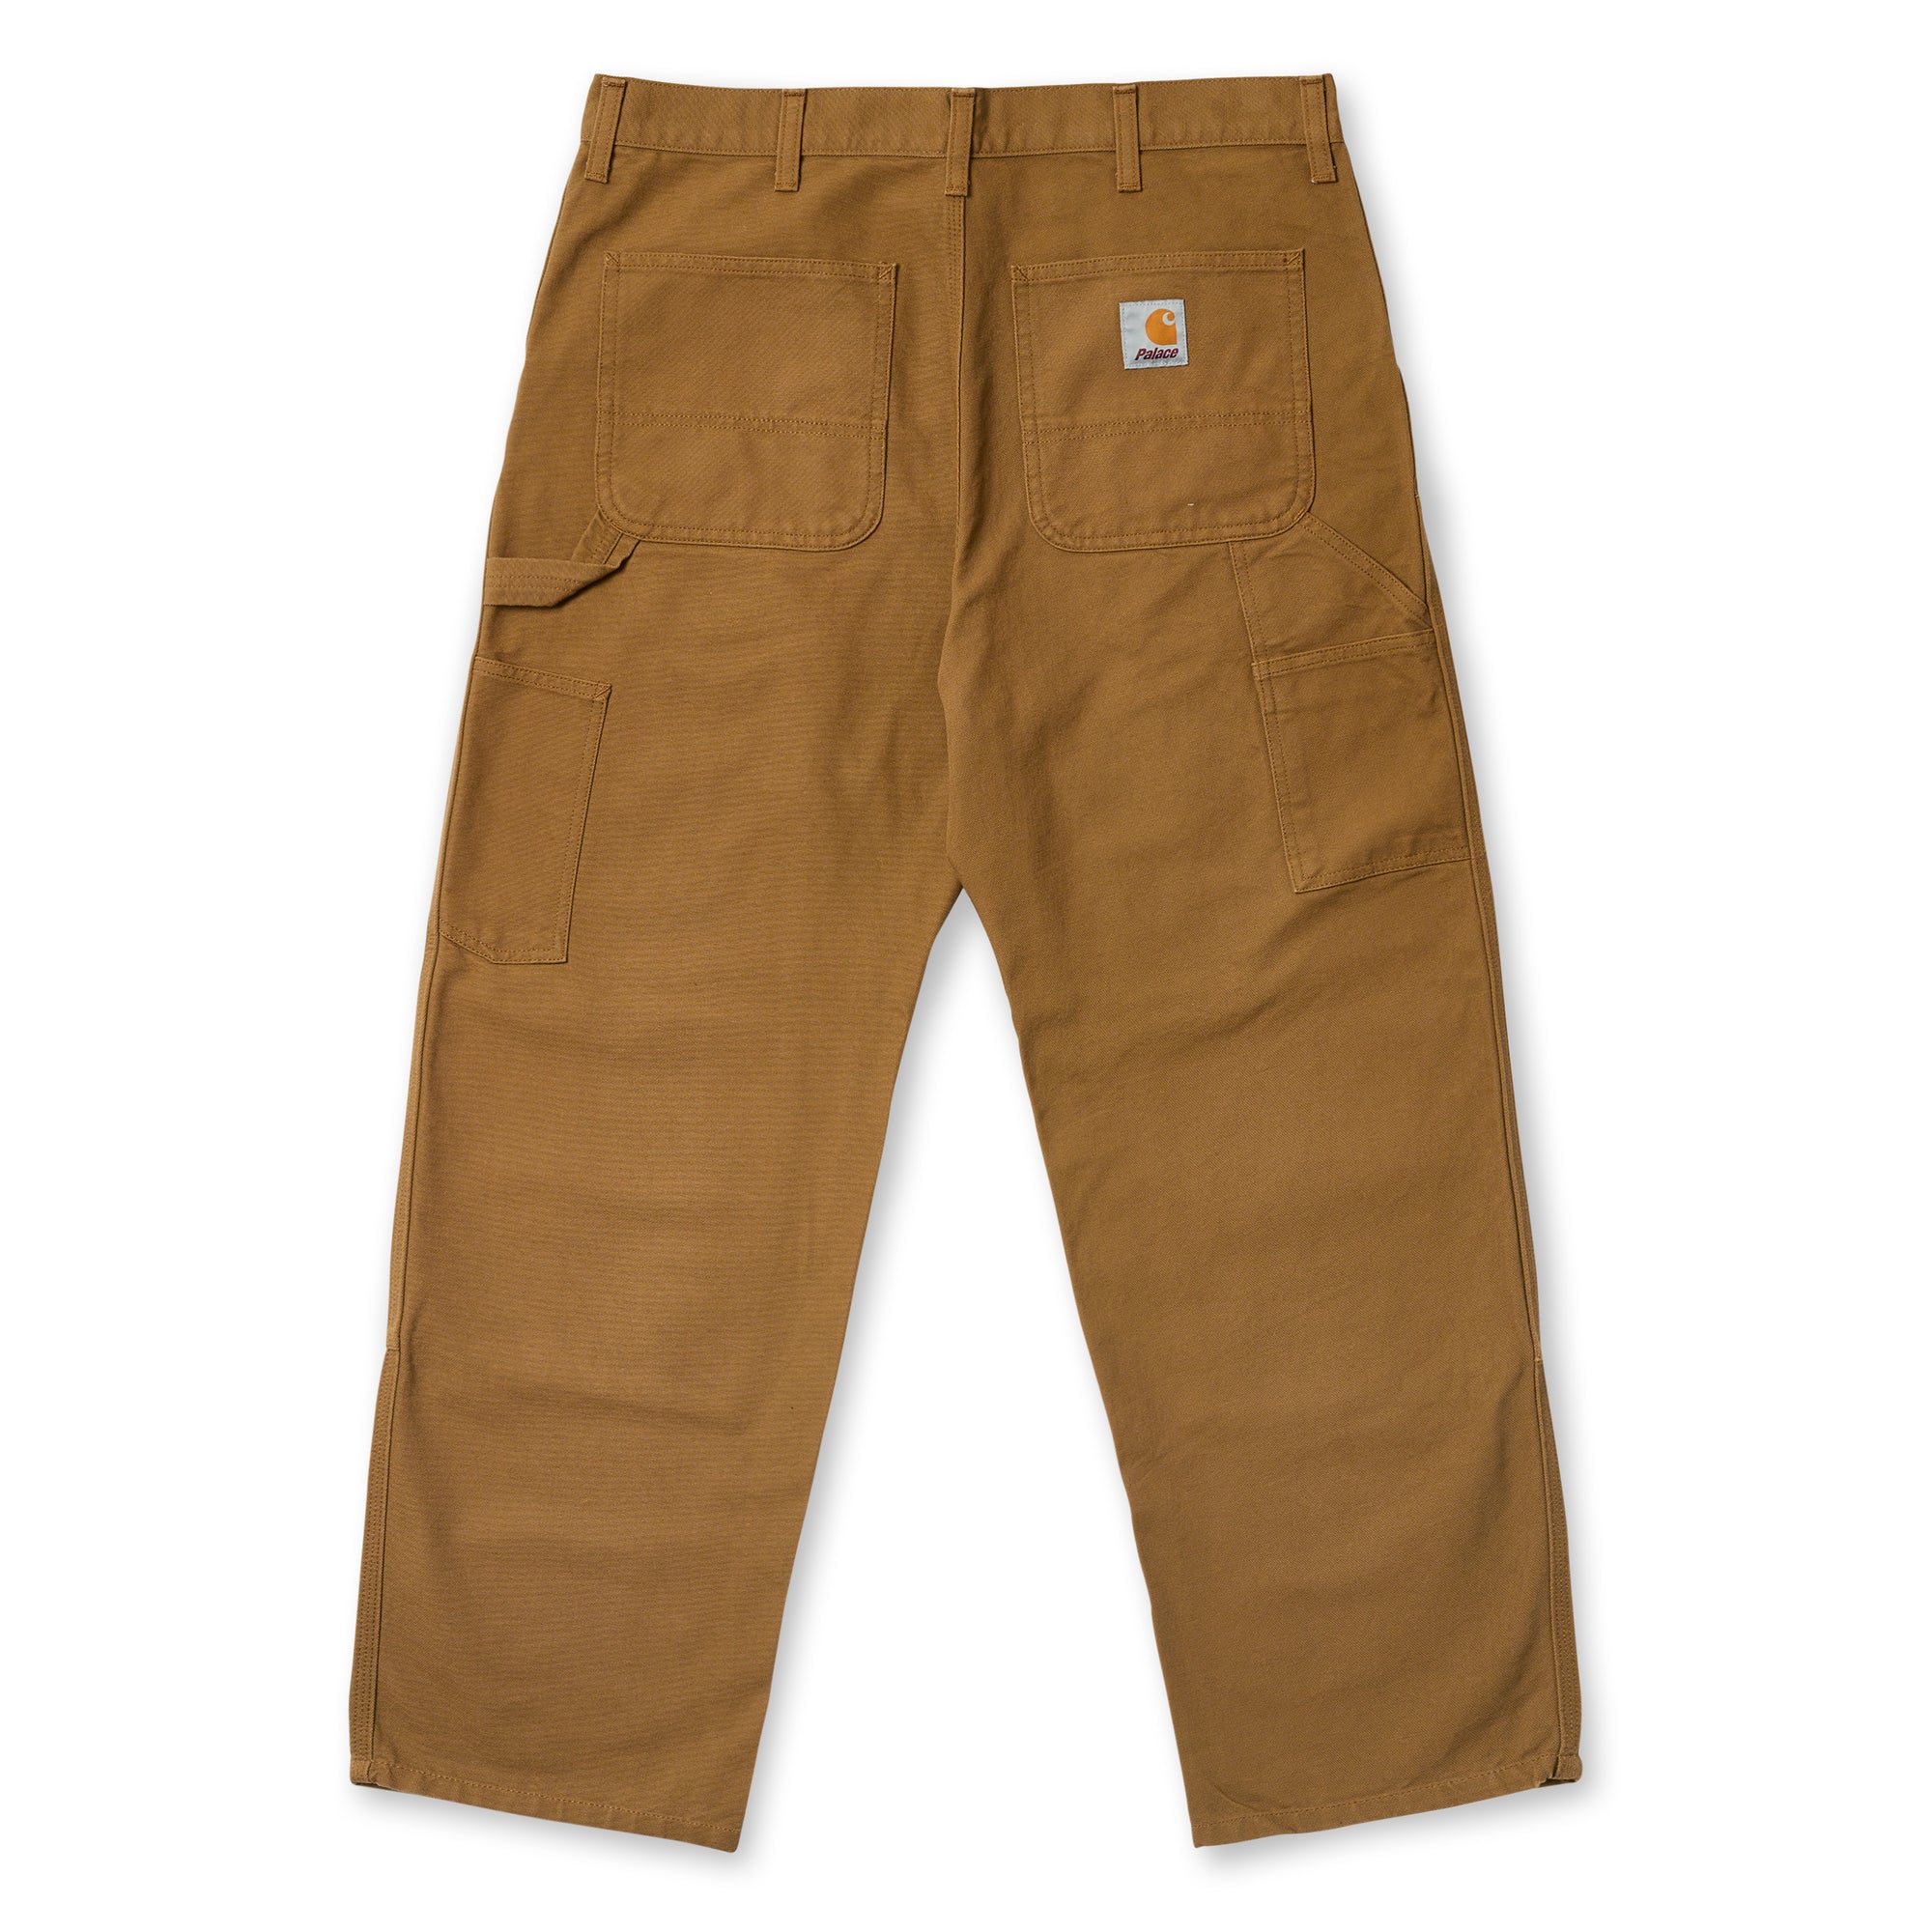 Palace - Carhartt WIP Double Knee Pant - (Hamilton Brown) view 2